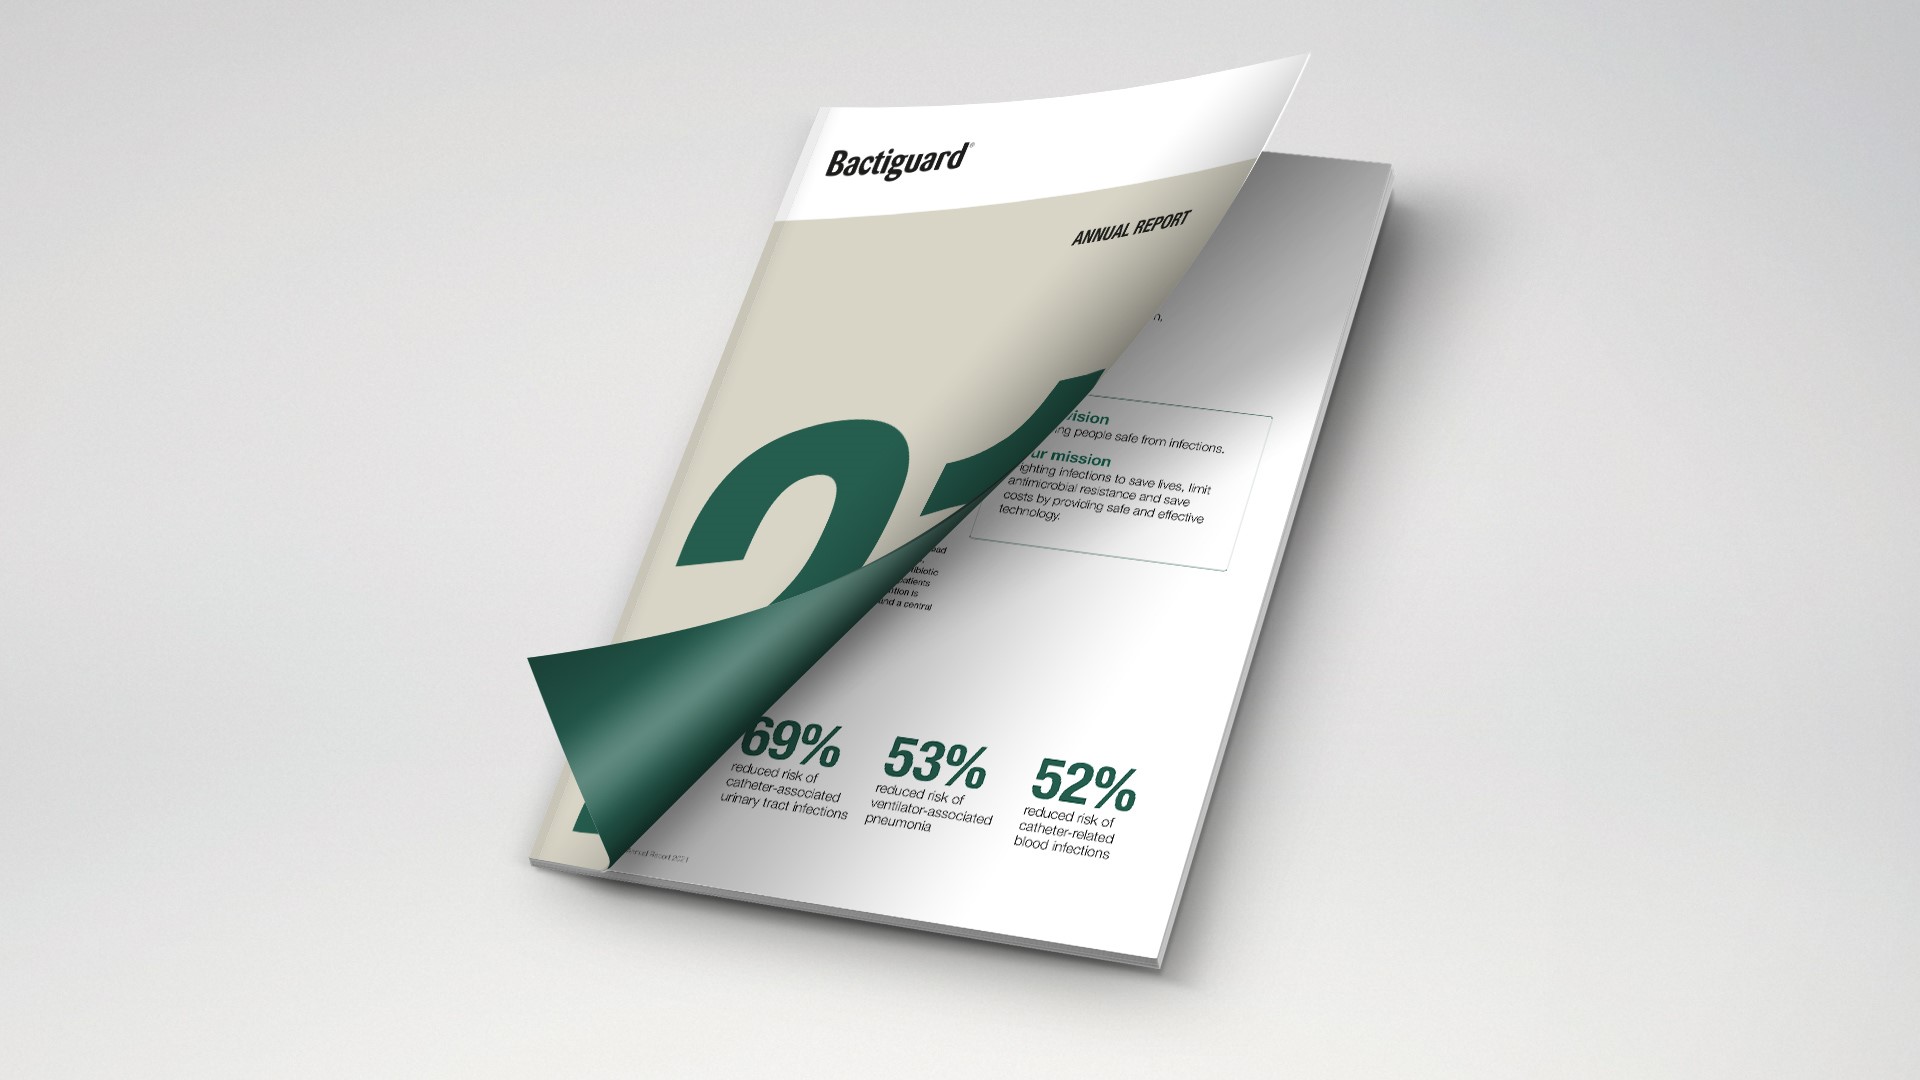 Bactiguard’s Annual Report 2021 <br /> - Accceleration with<br /> the patient in focus